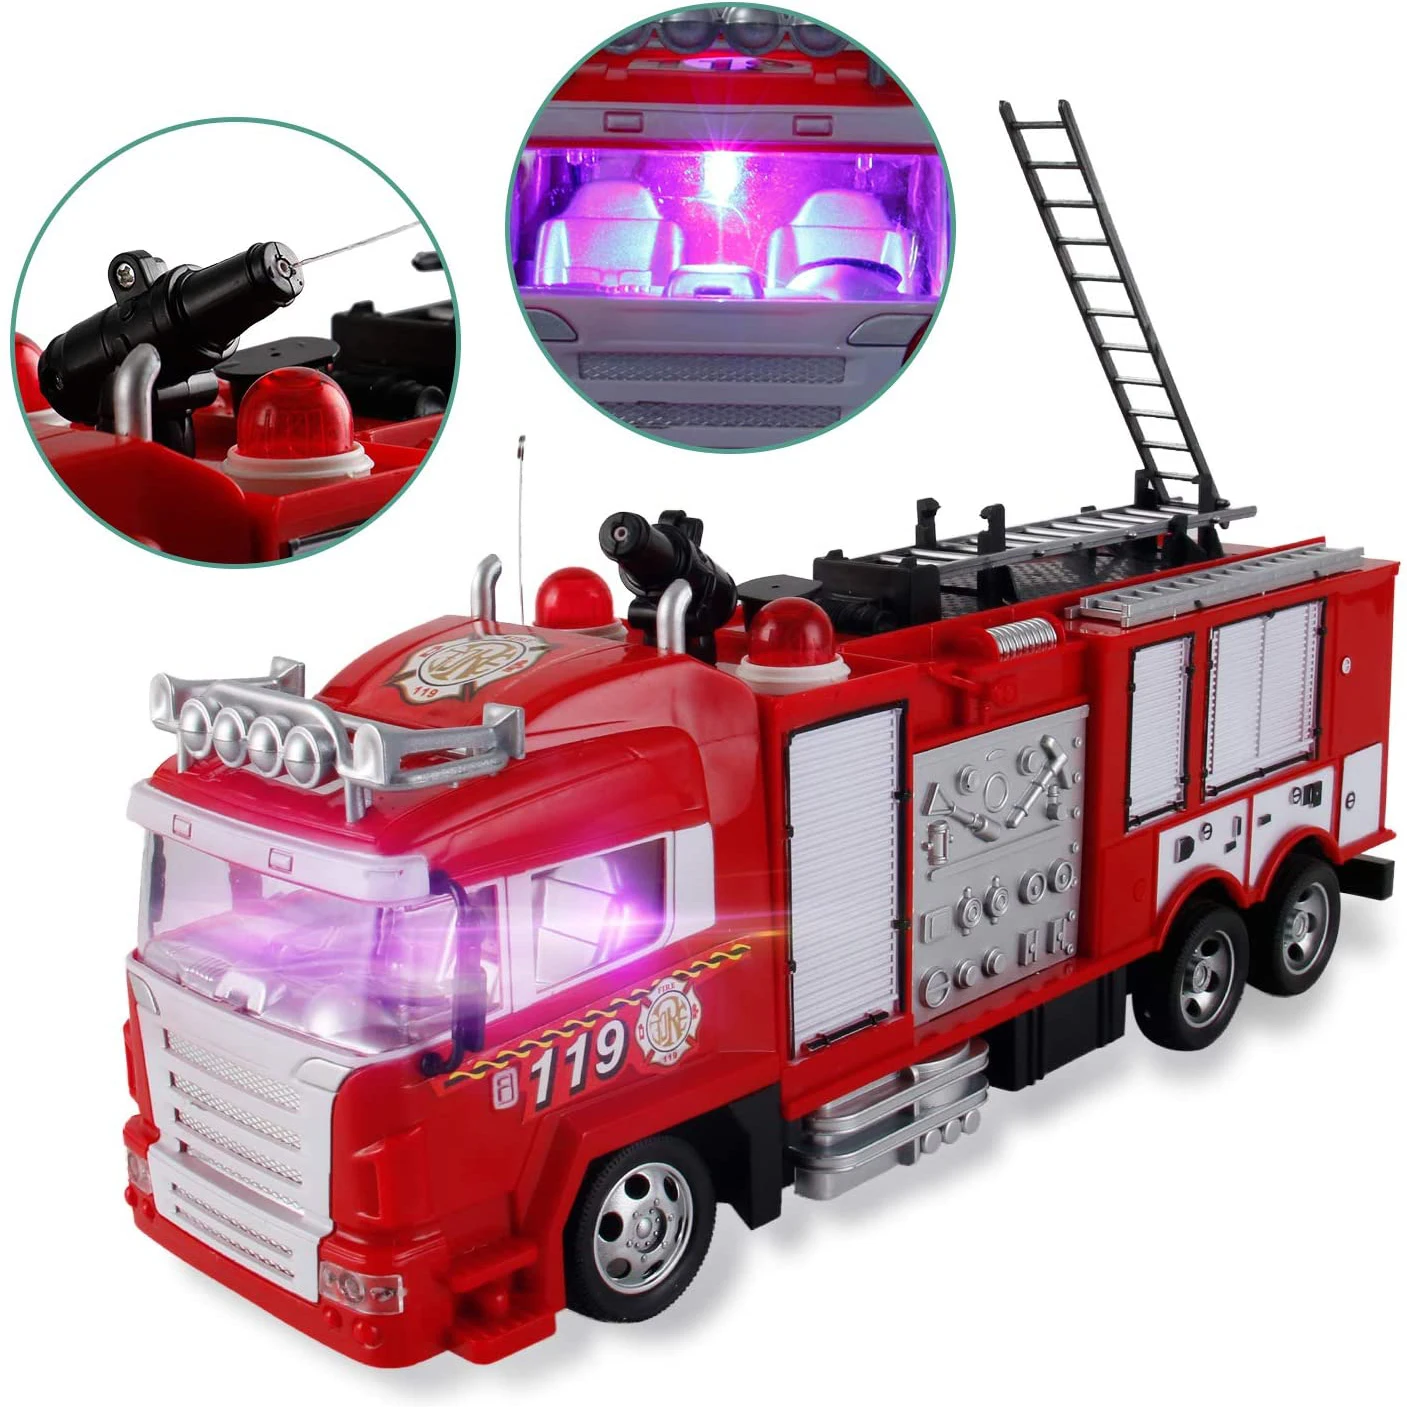 RC Rescue Fire Engine Toy Truck Radio Control RC Fire Truck with Working Water Pump Shoots and Squirts Water Toys for Kids